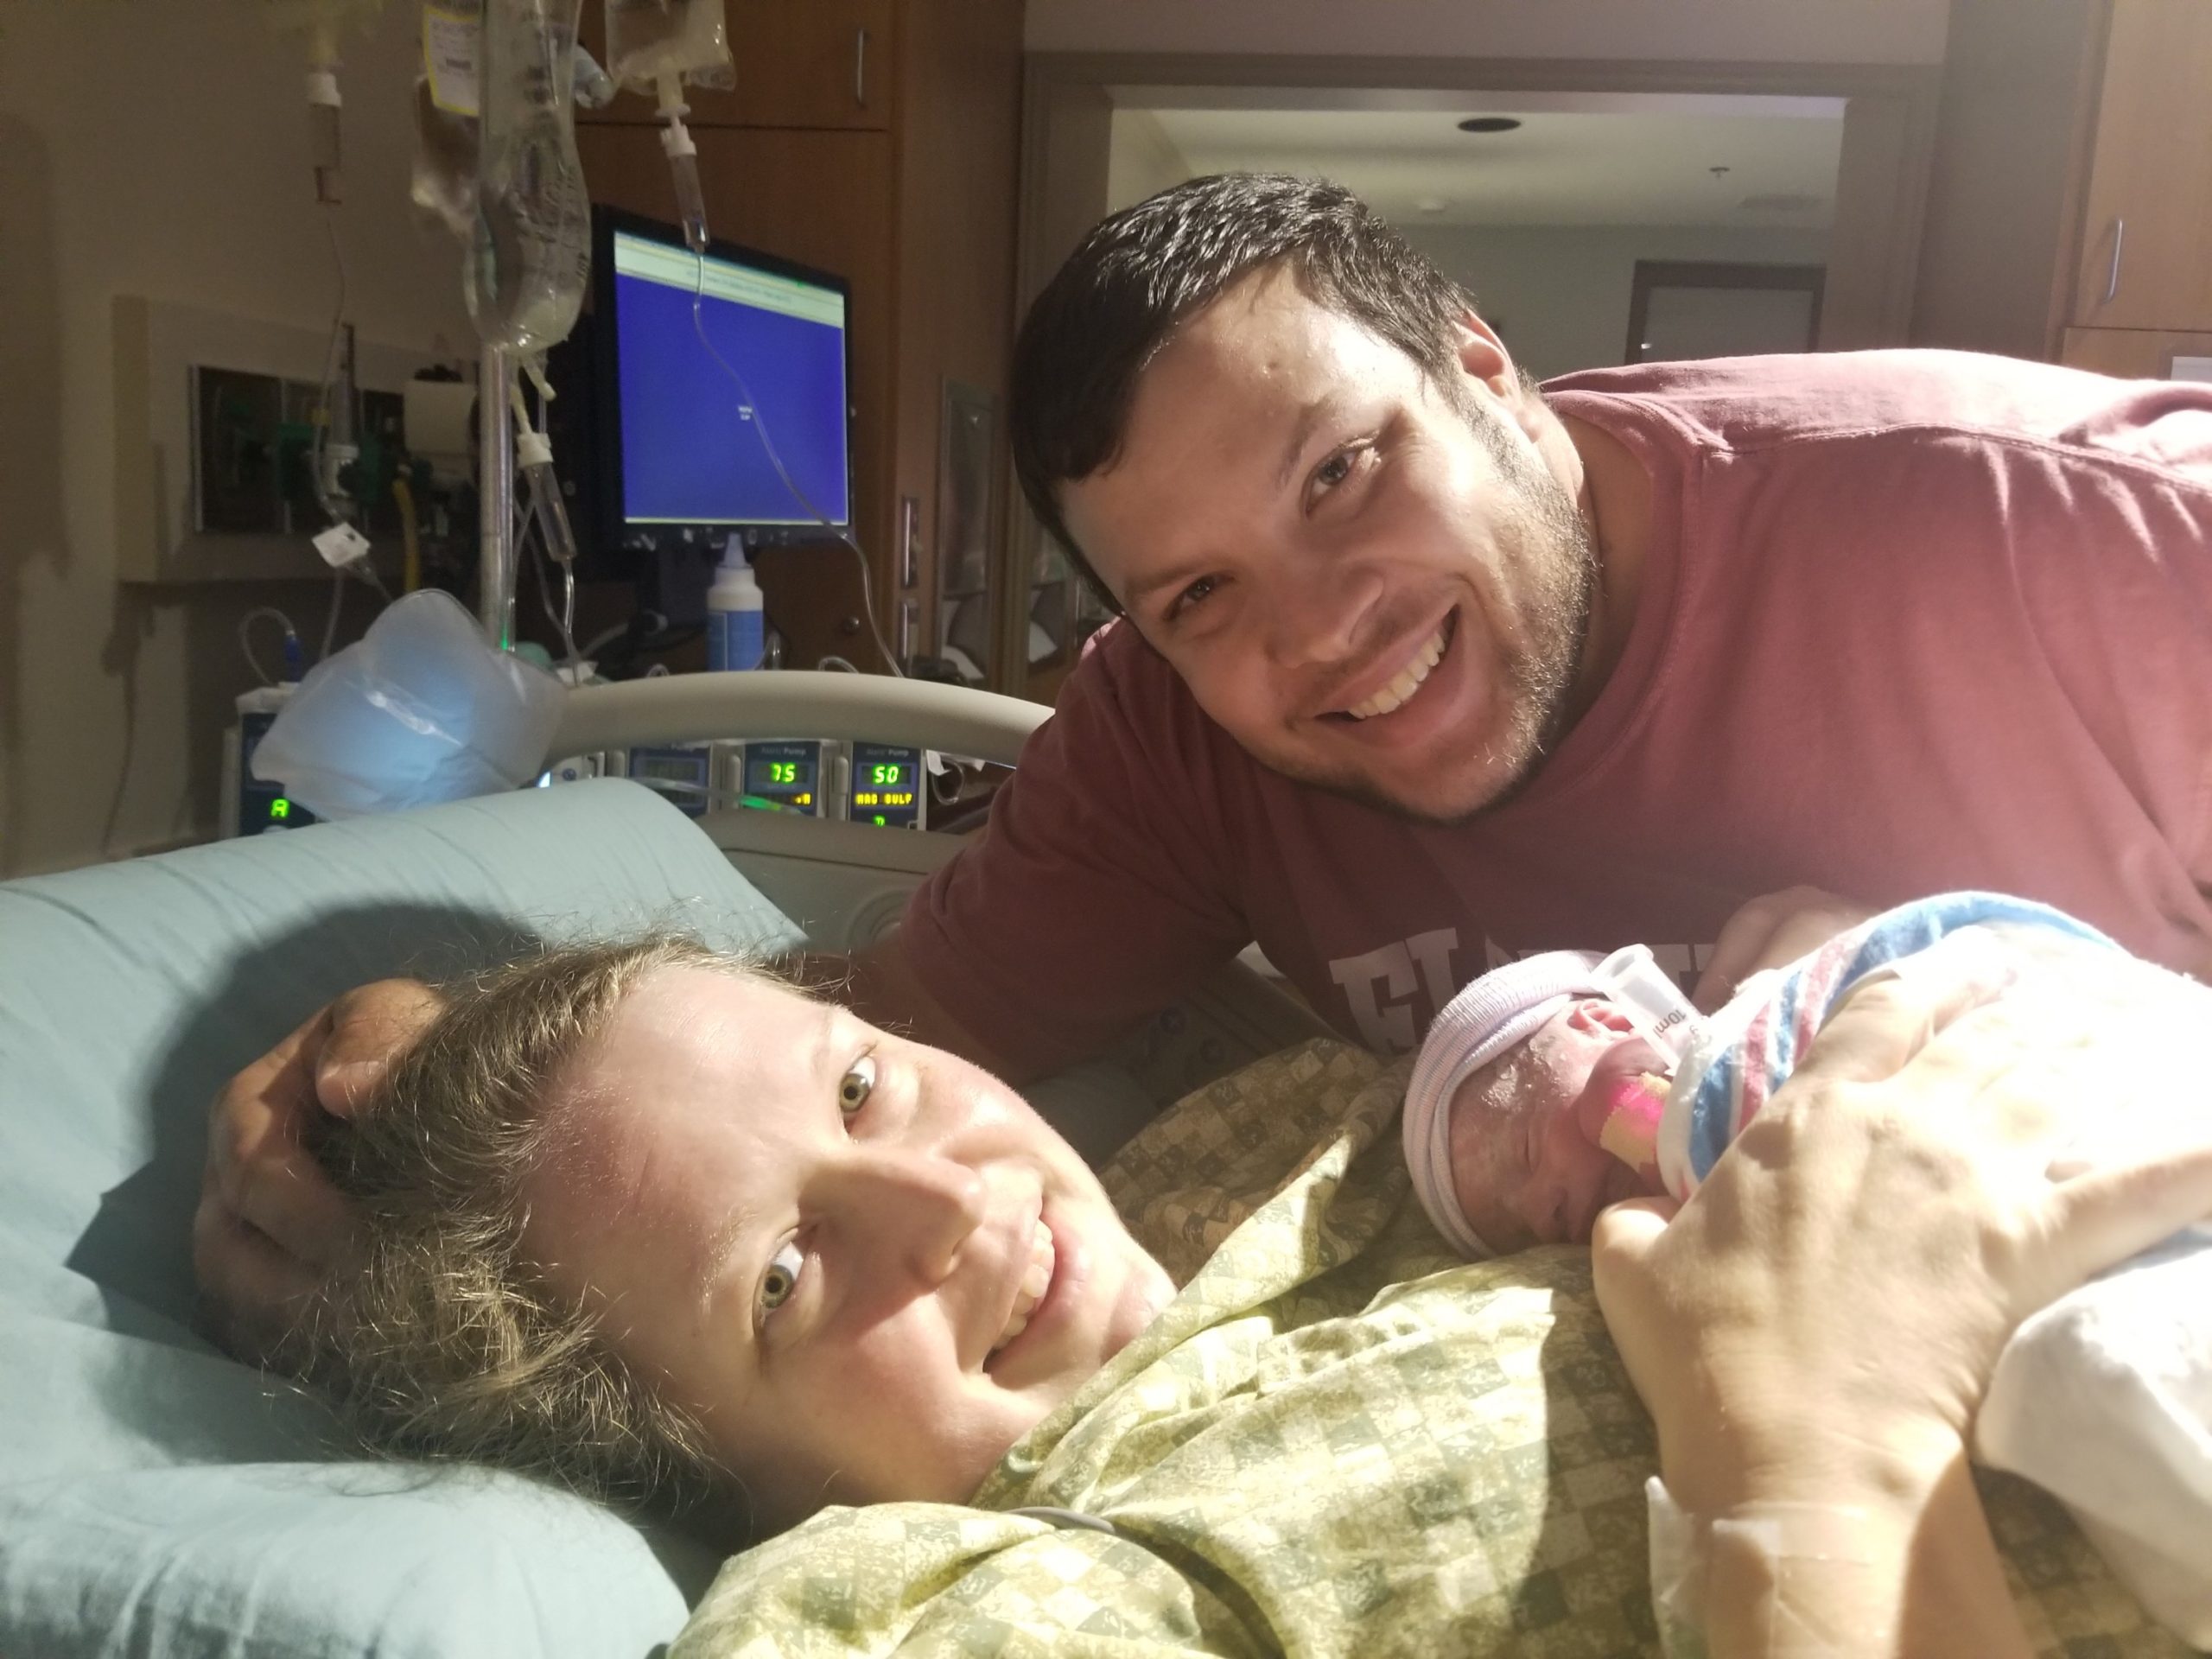 Mom and dad with newborn baby in hospital